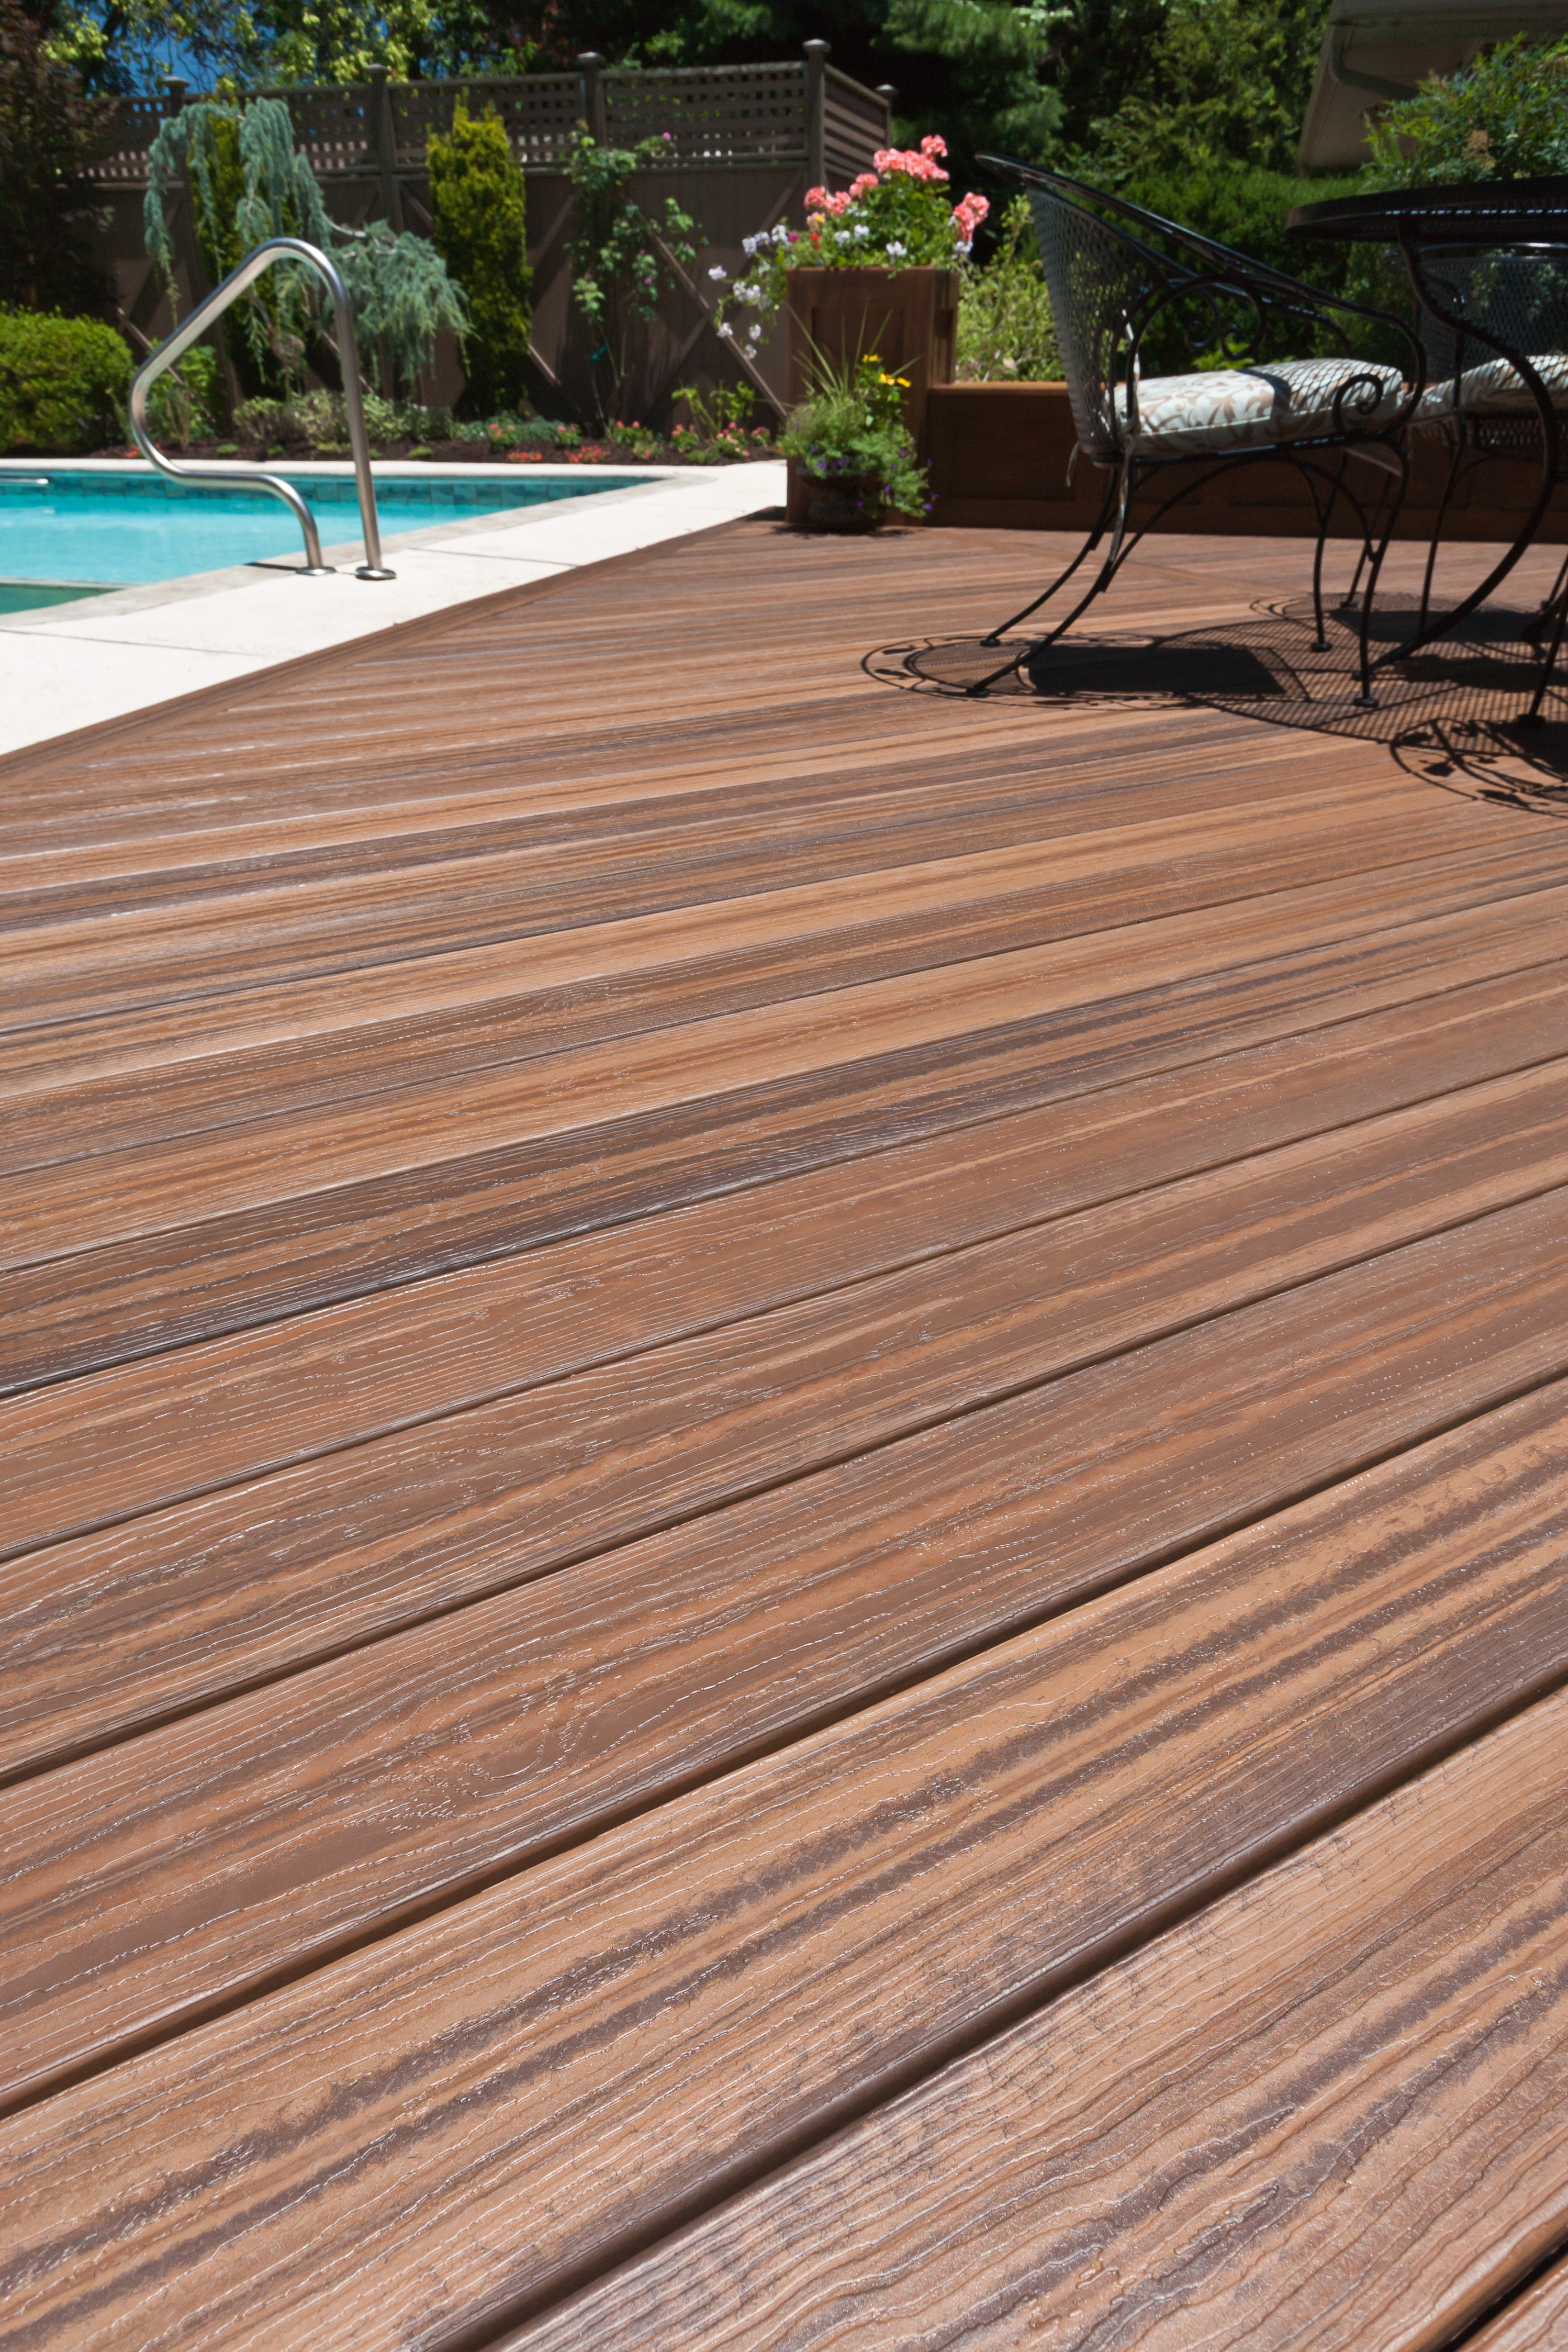 Tamko Decking East Side Lumberyard Supply Co Inc with size 2996 X 4493